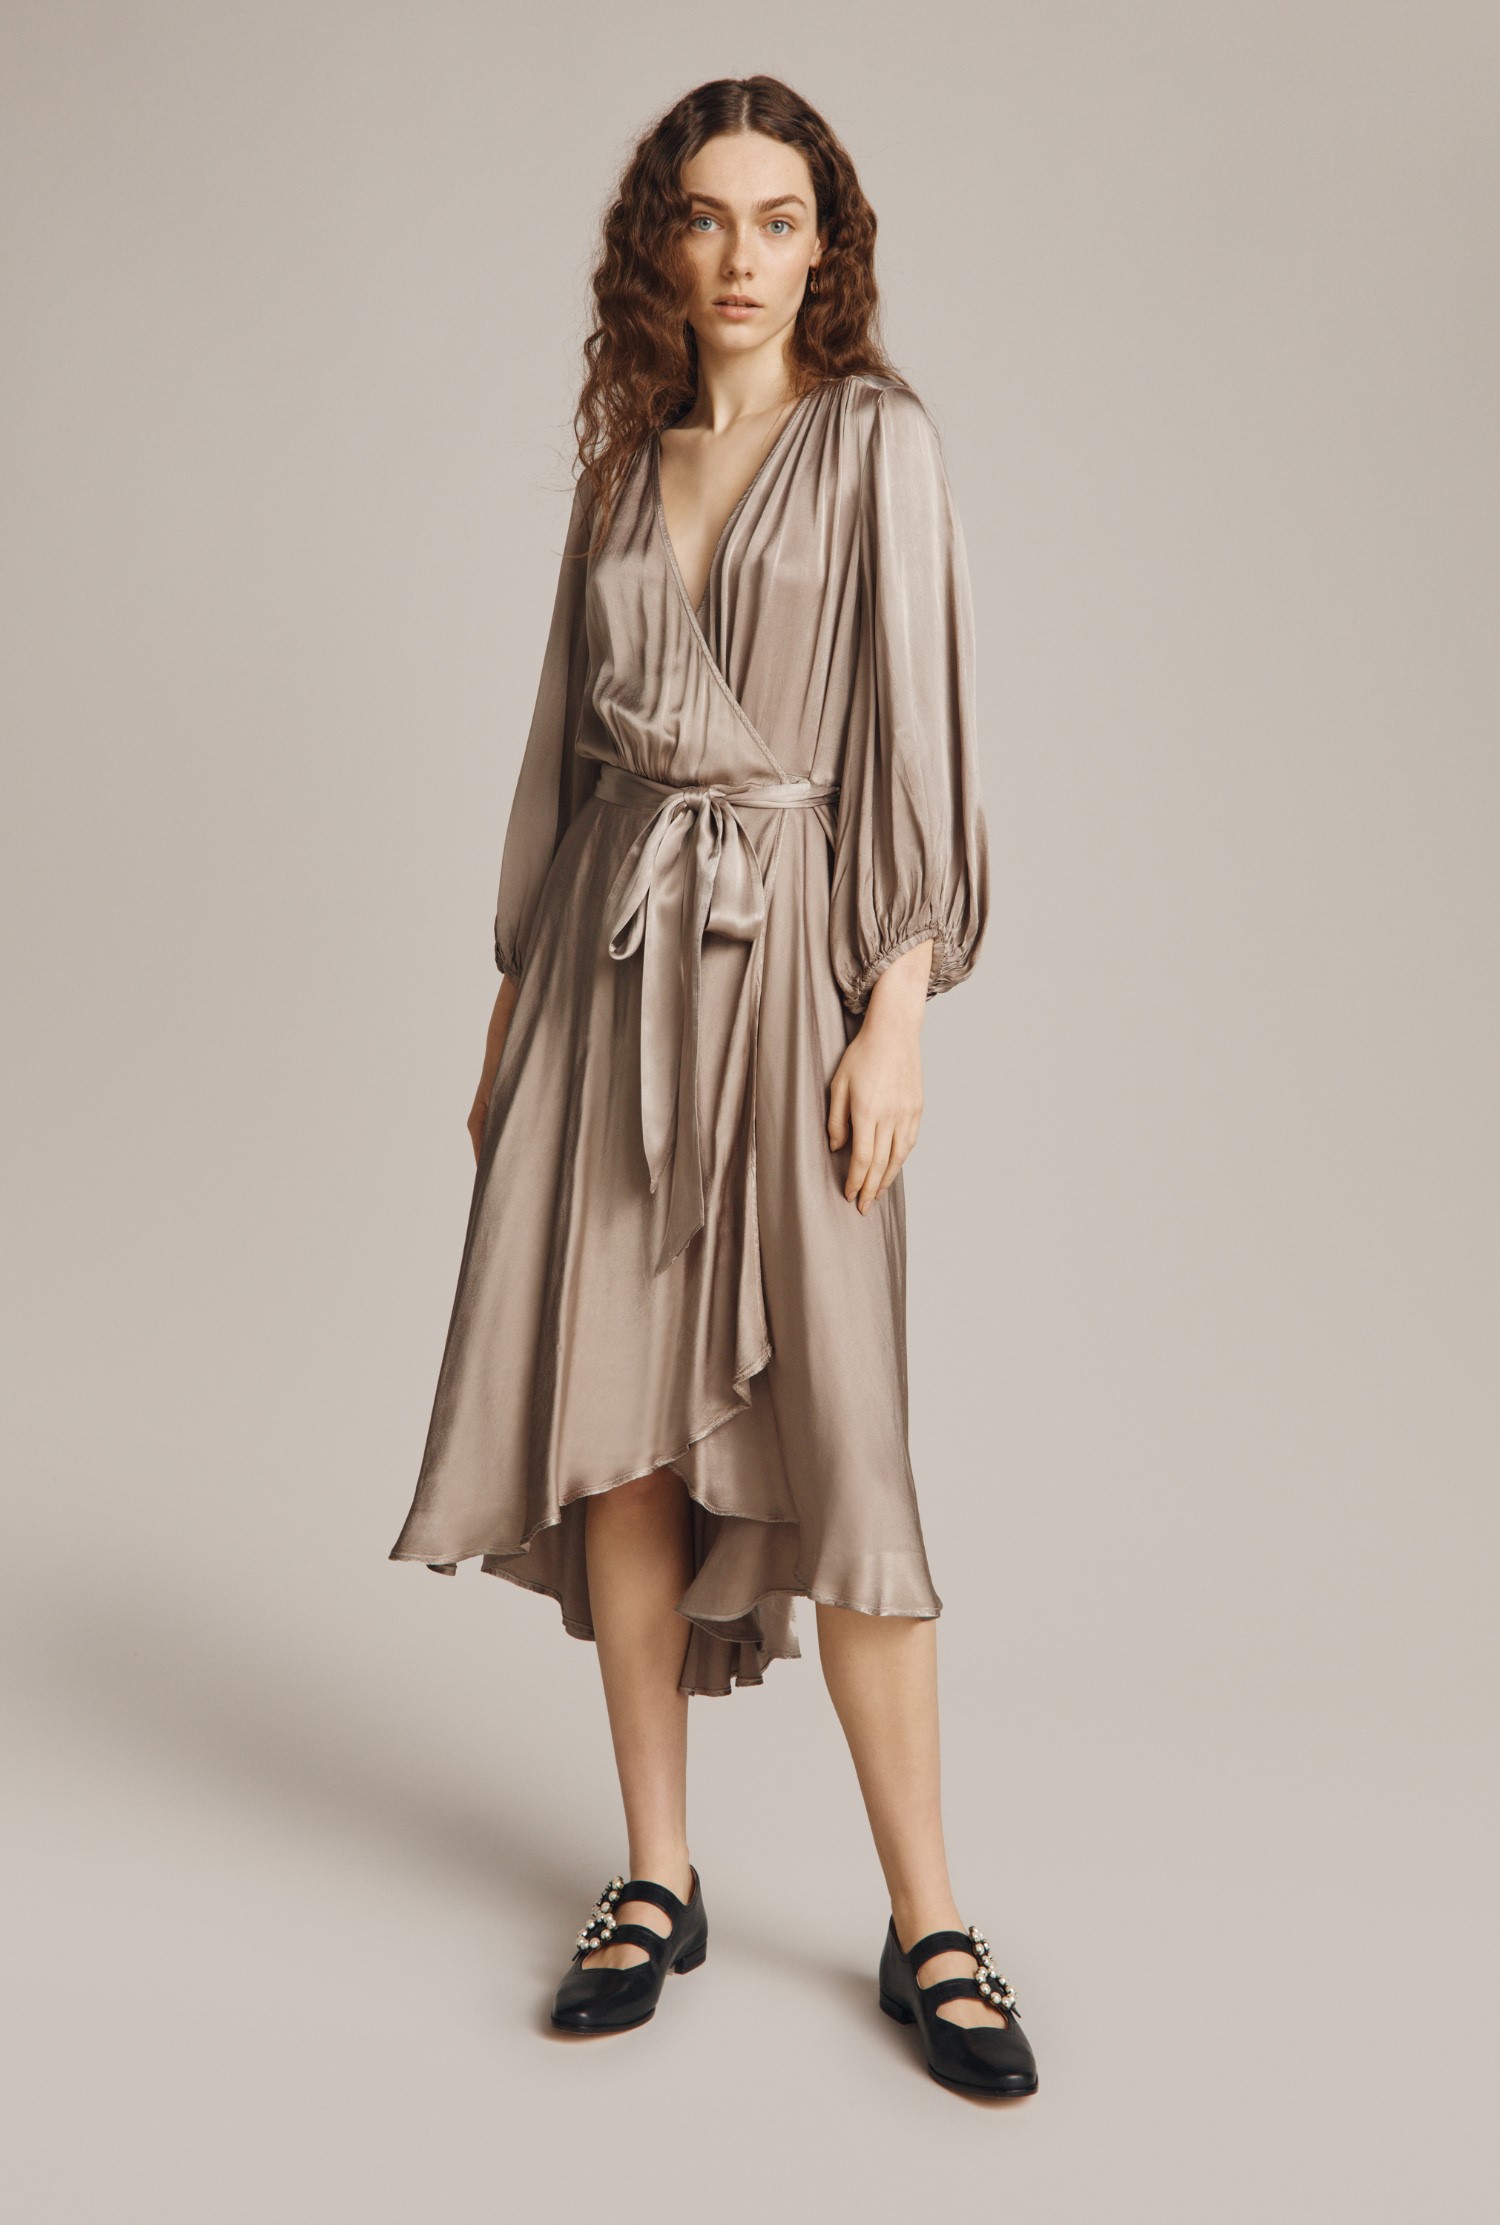 Aggie Slate Satin Wrap Dress with Sleeves | Ghost London